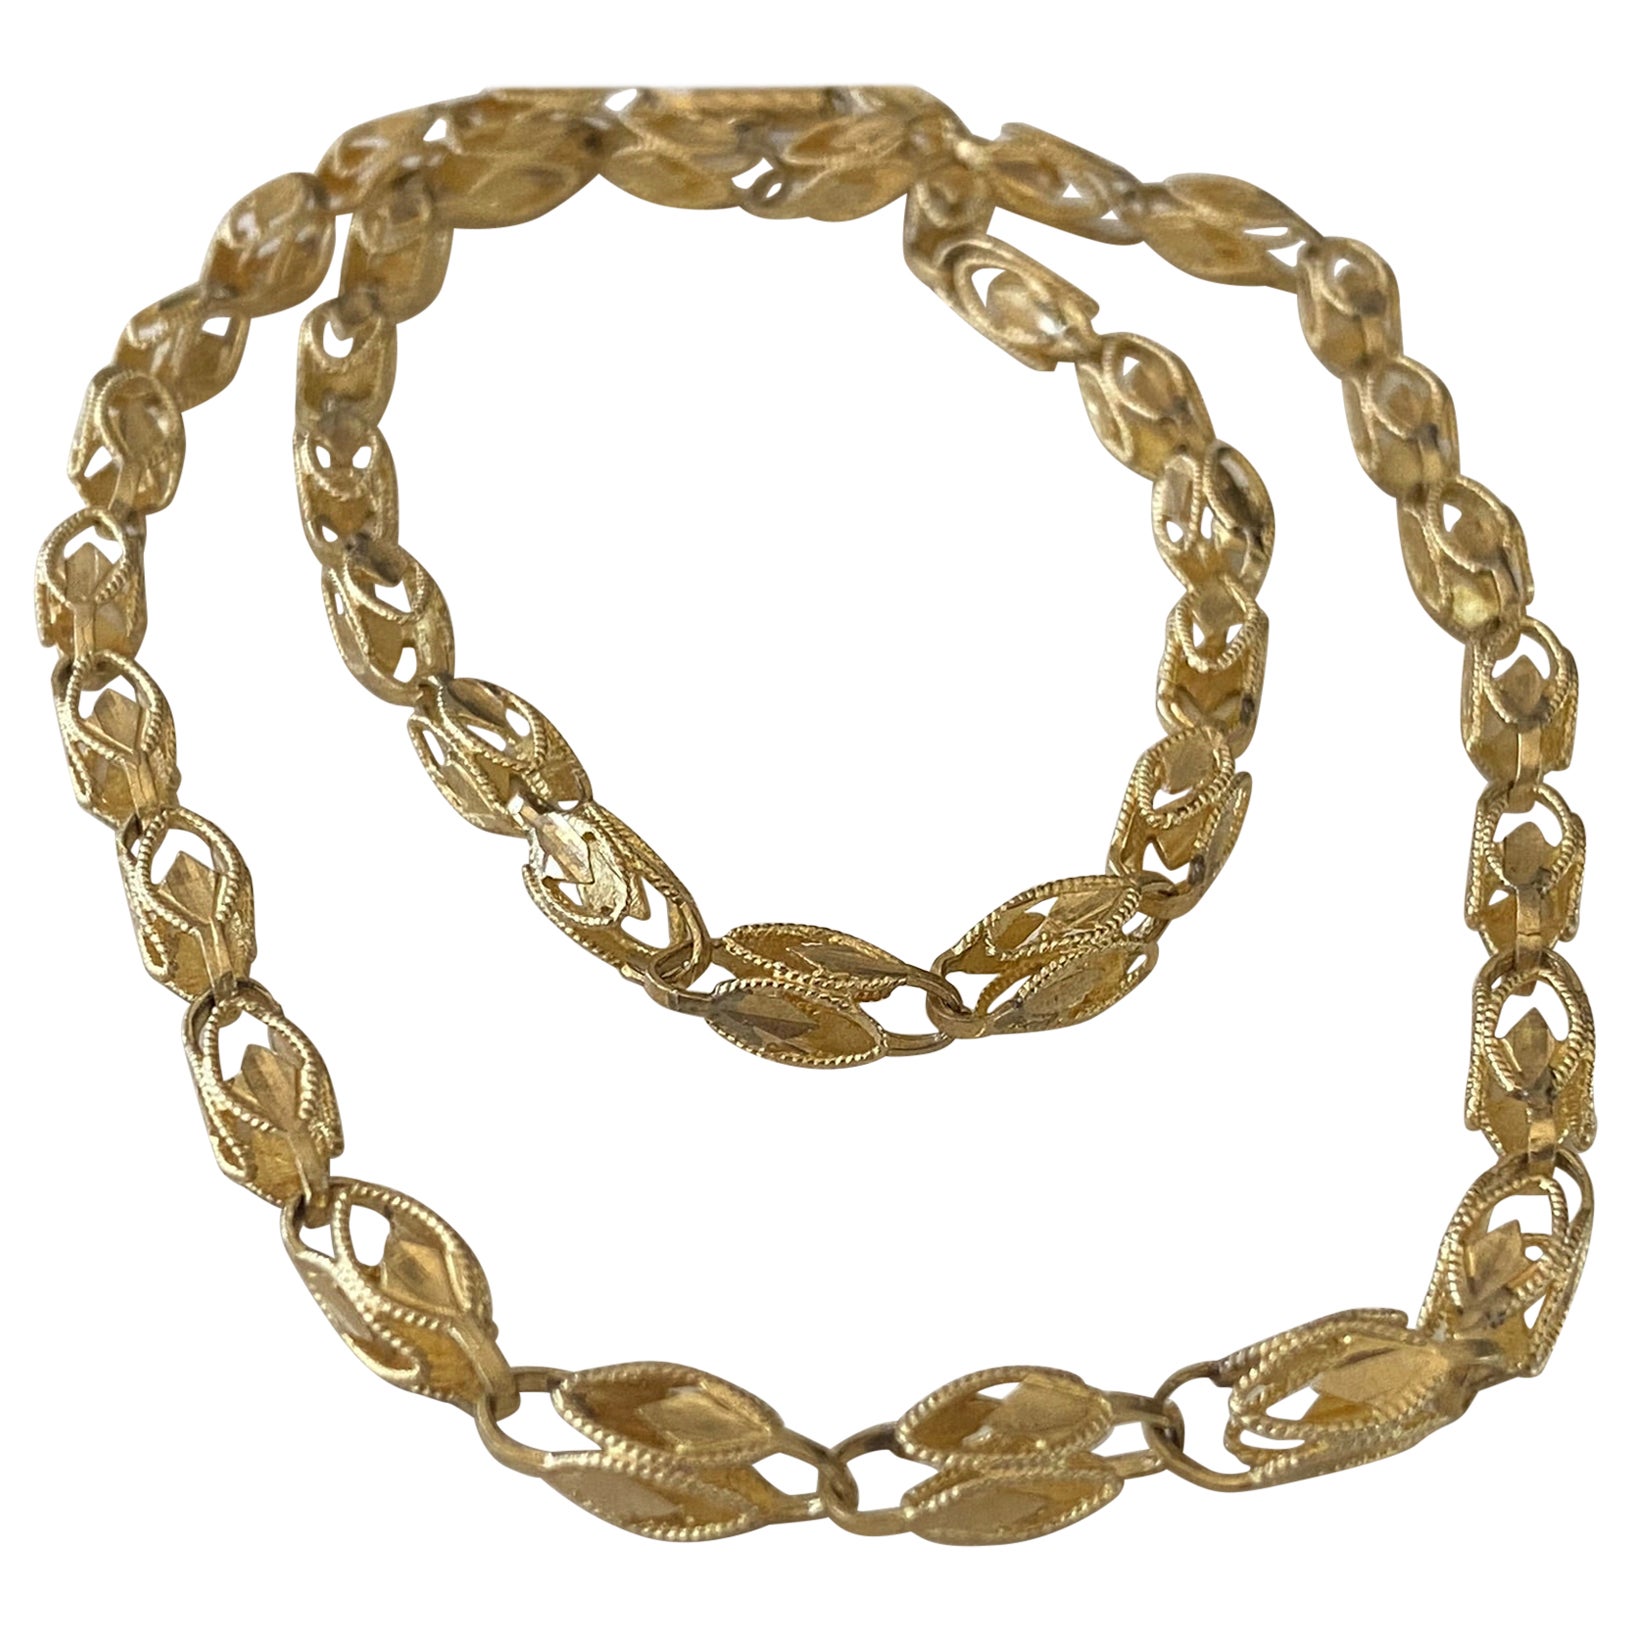 Antique Gold Chain Link Necklace For Sale